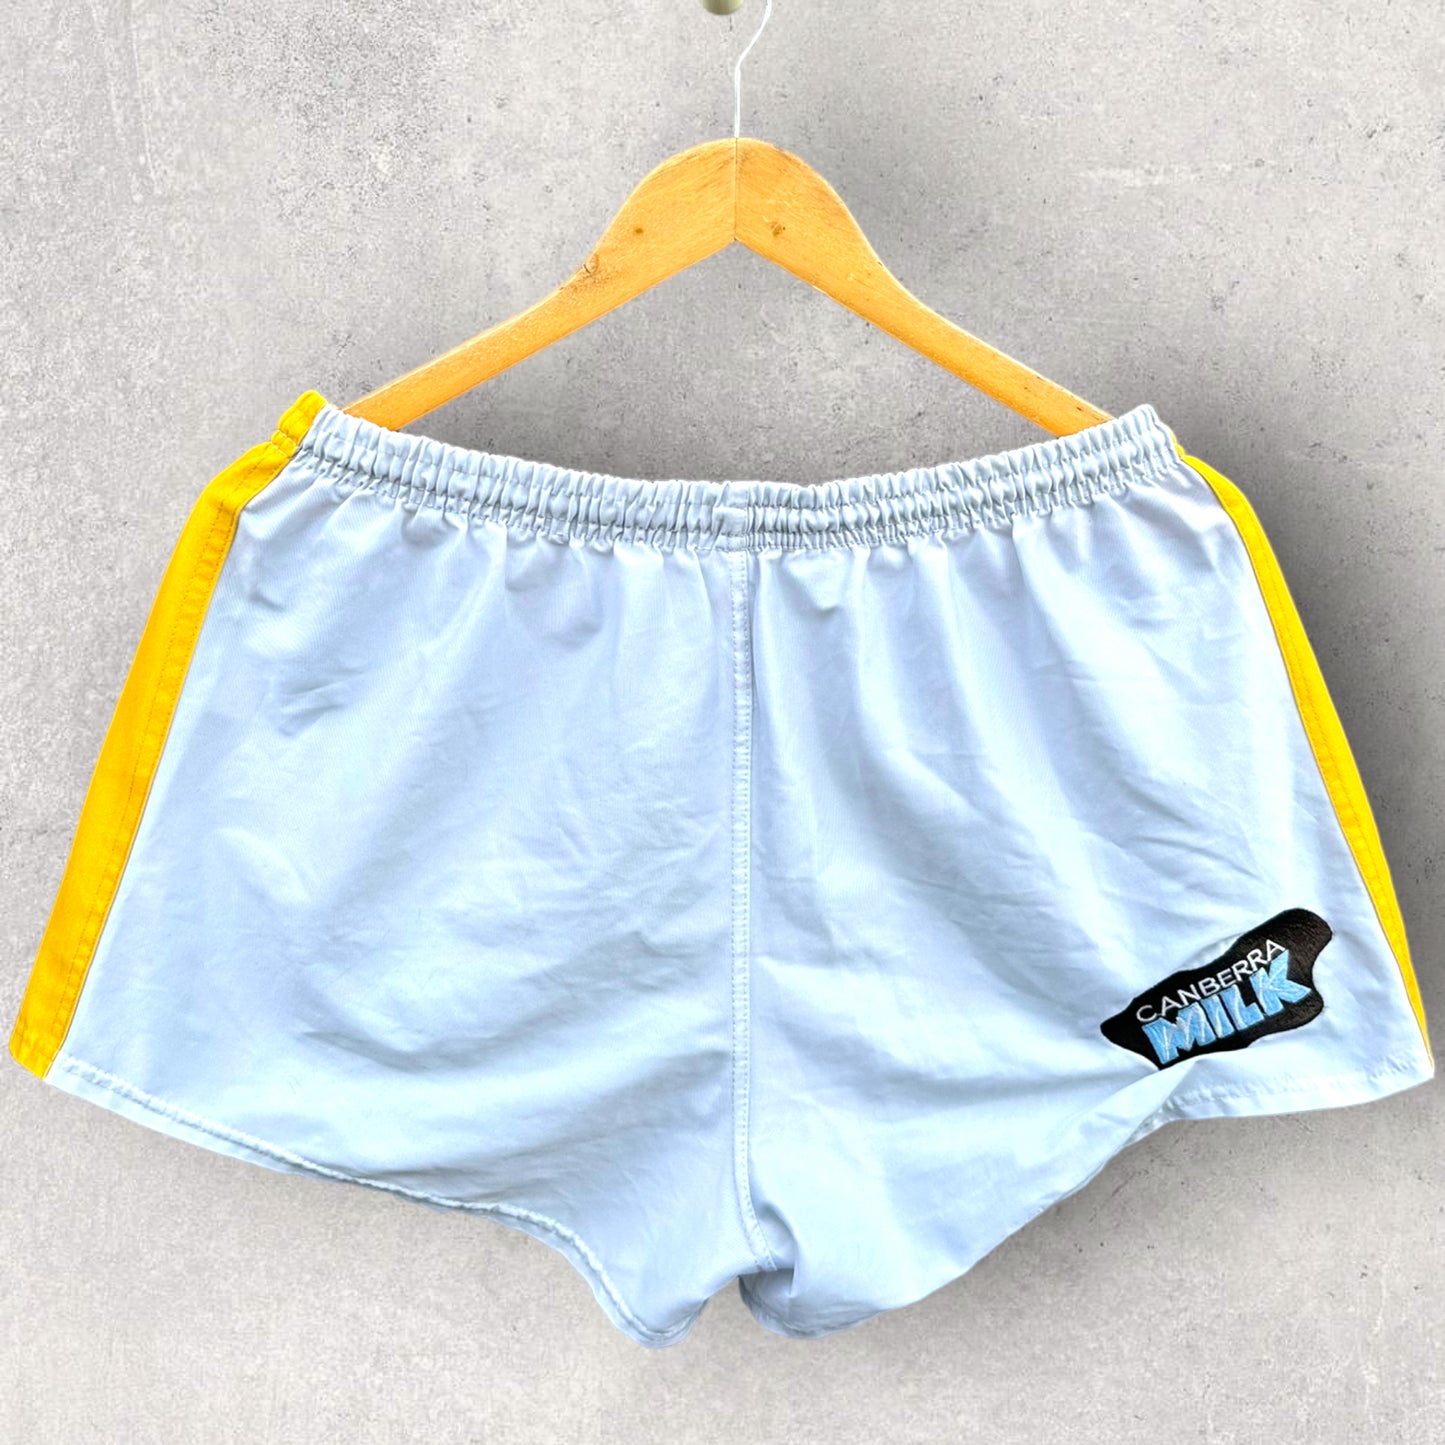 CANBERRA RAIDERS VINTAGE ISC MATCH SHORTS